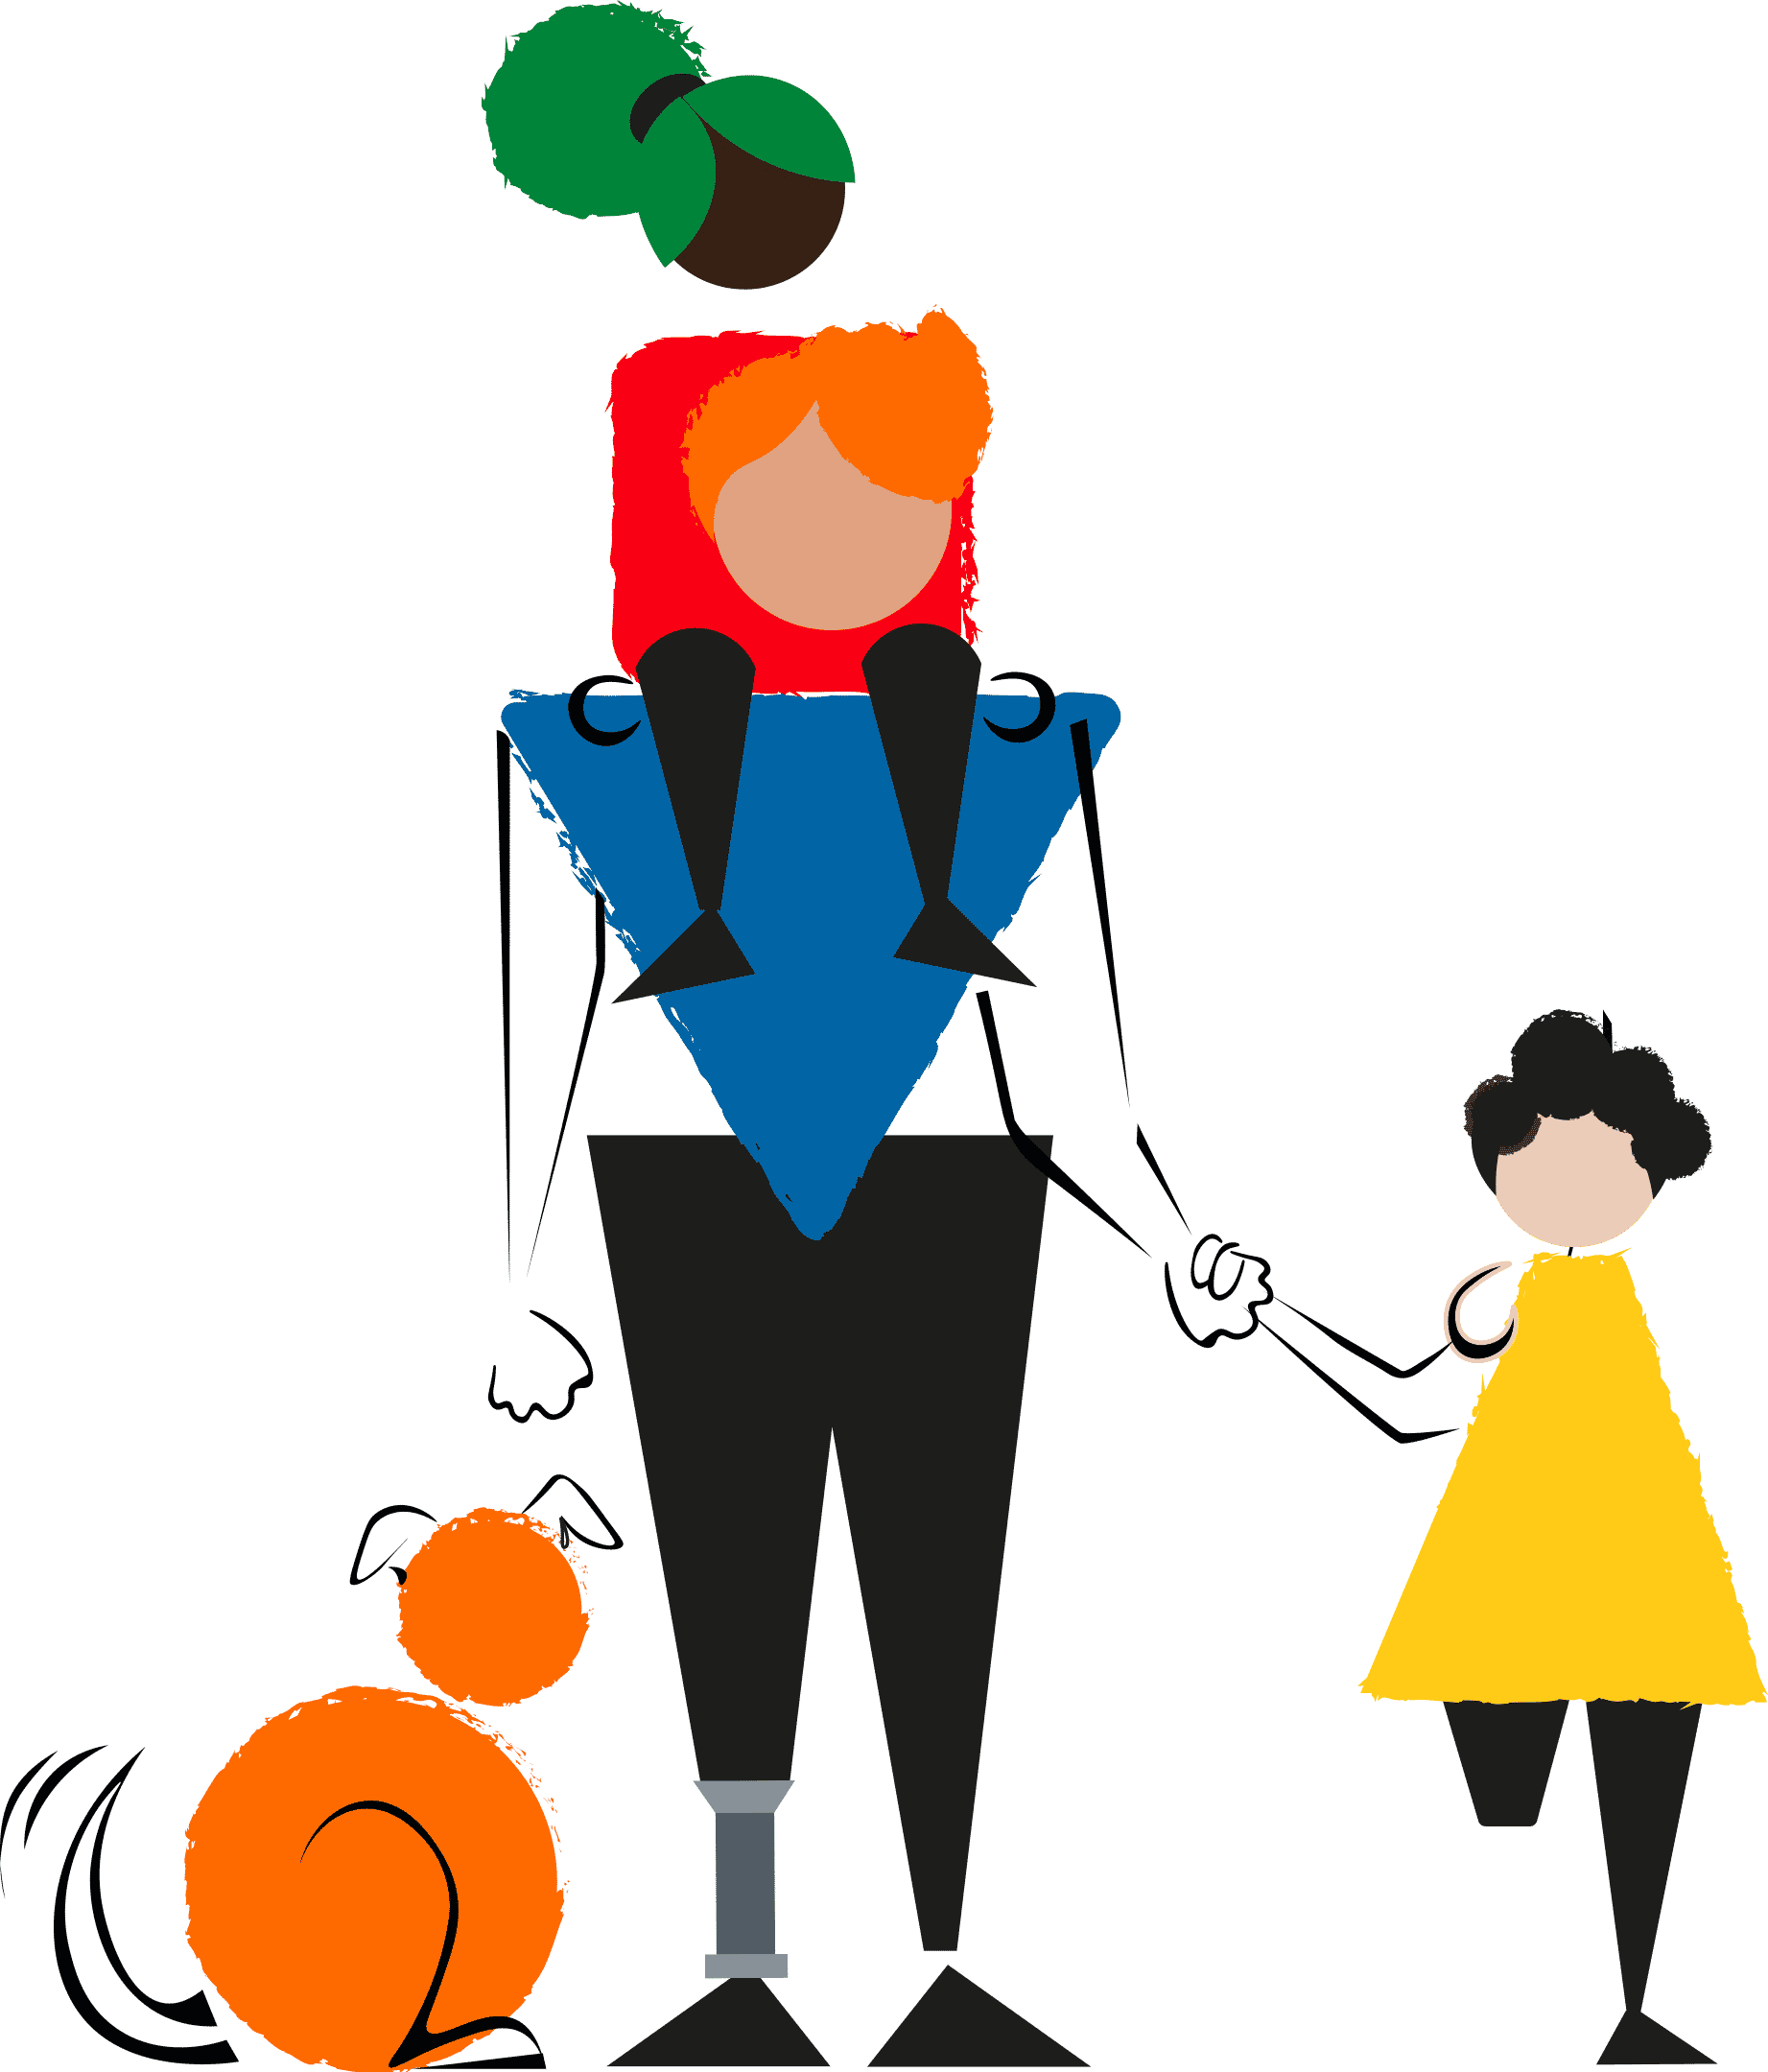 Playful illustration of a girl on the shoulders of an adult, holding the hand of a Disabled girl next to a dog